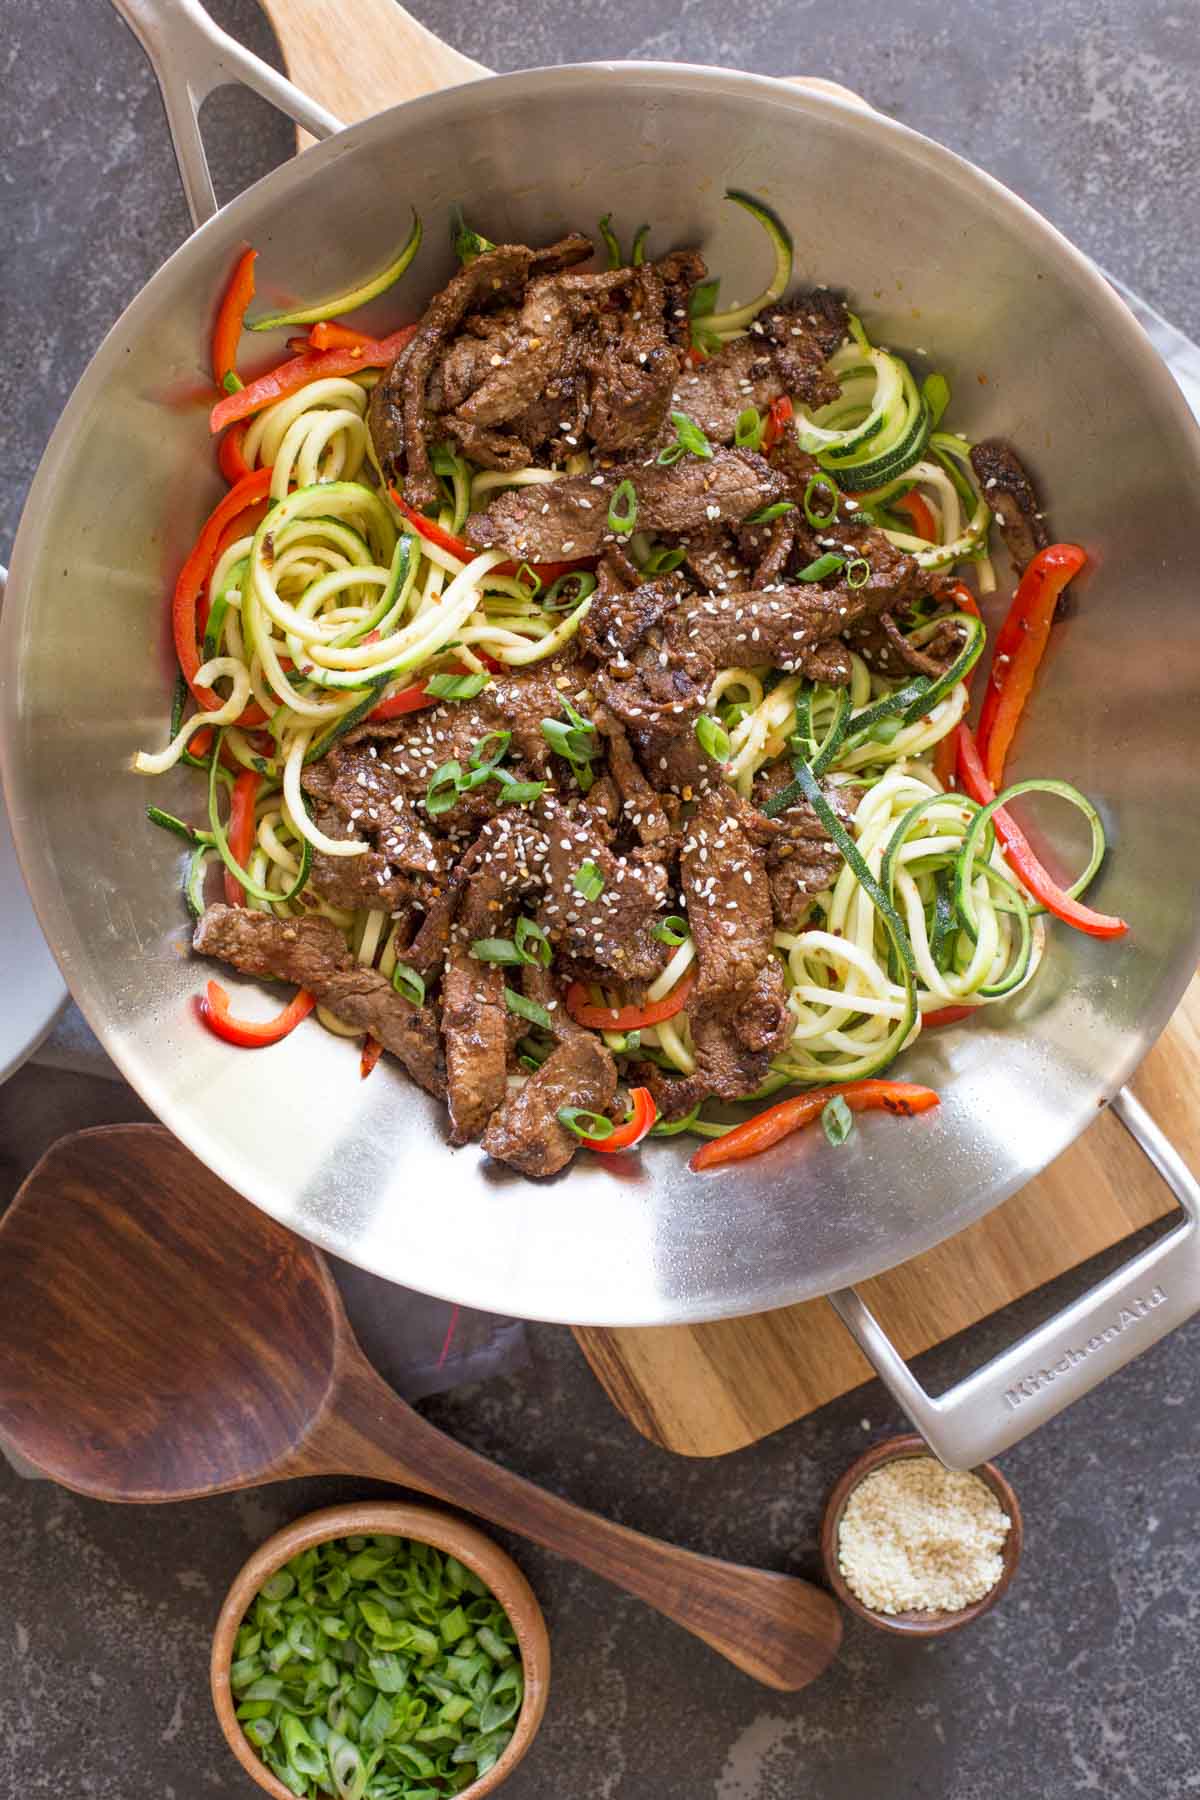 Overhead shot of a large wok with Spicy Korean Beef and Zoodles in it, sitting on a wood cutting board, with a small wood bowl of sesame seeds, a small wood bowl of green onions and a wooden serving spoon next the the cutting board.   